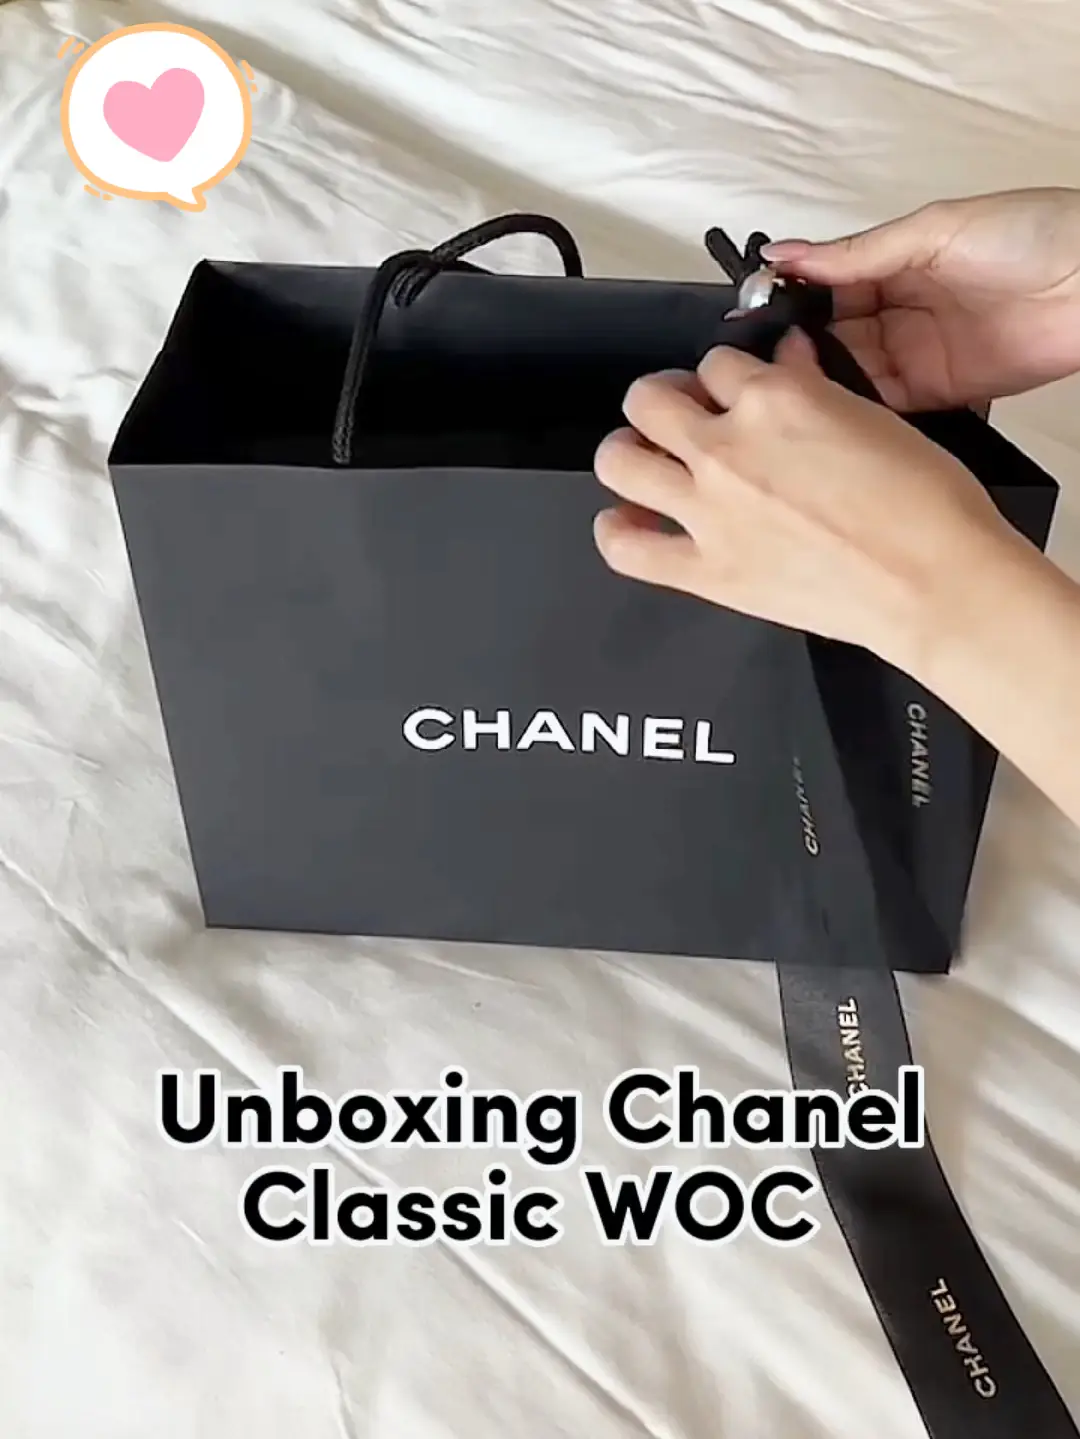 CHANEL HOLIDAY GIFT SETS HAUL & UNBOXING! ALL 6 TWEED MAKEUP BAGS